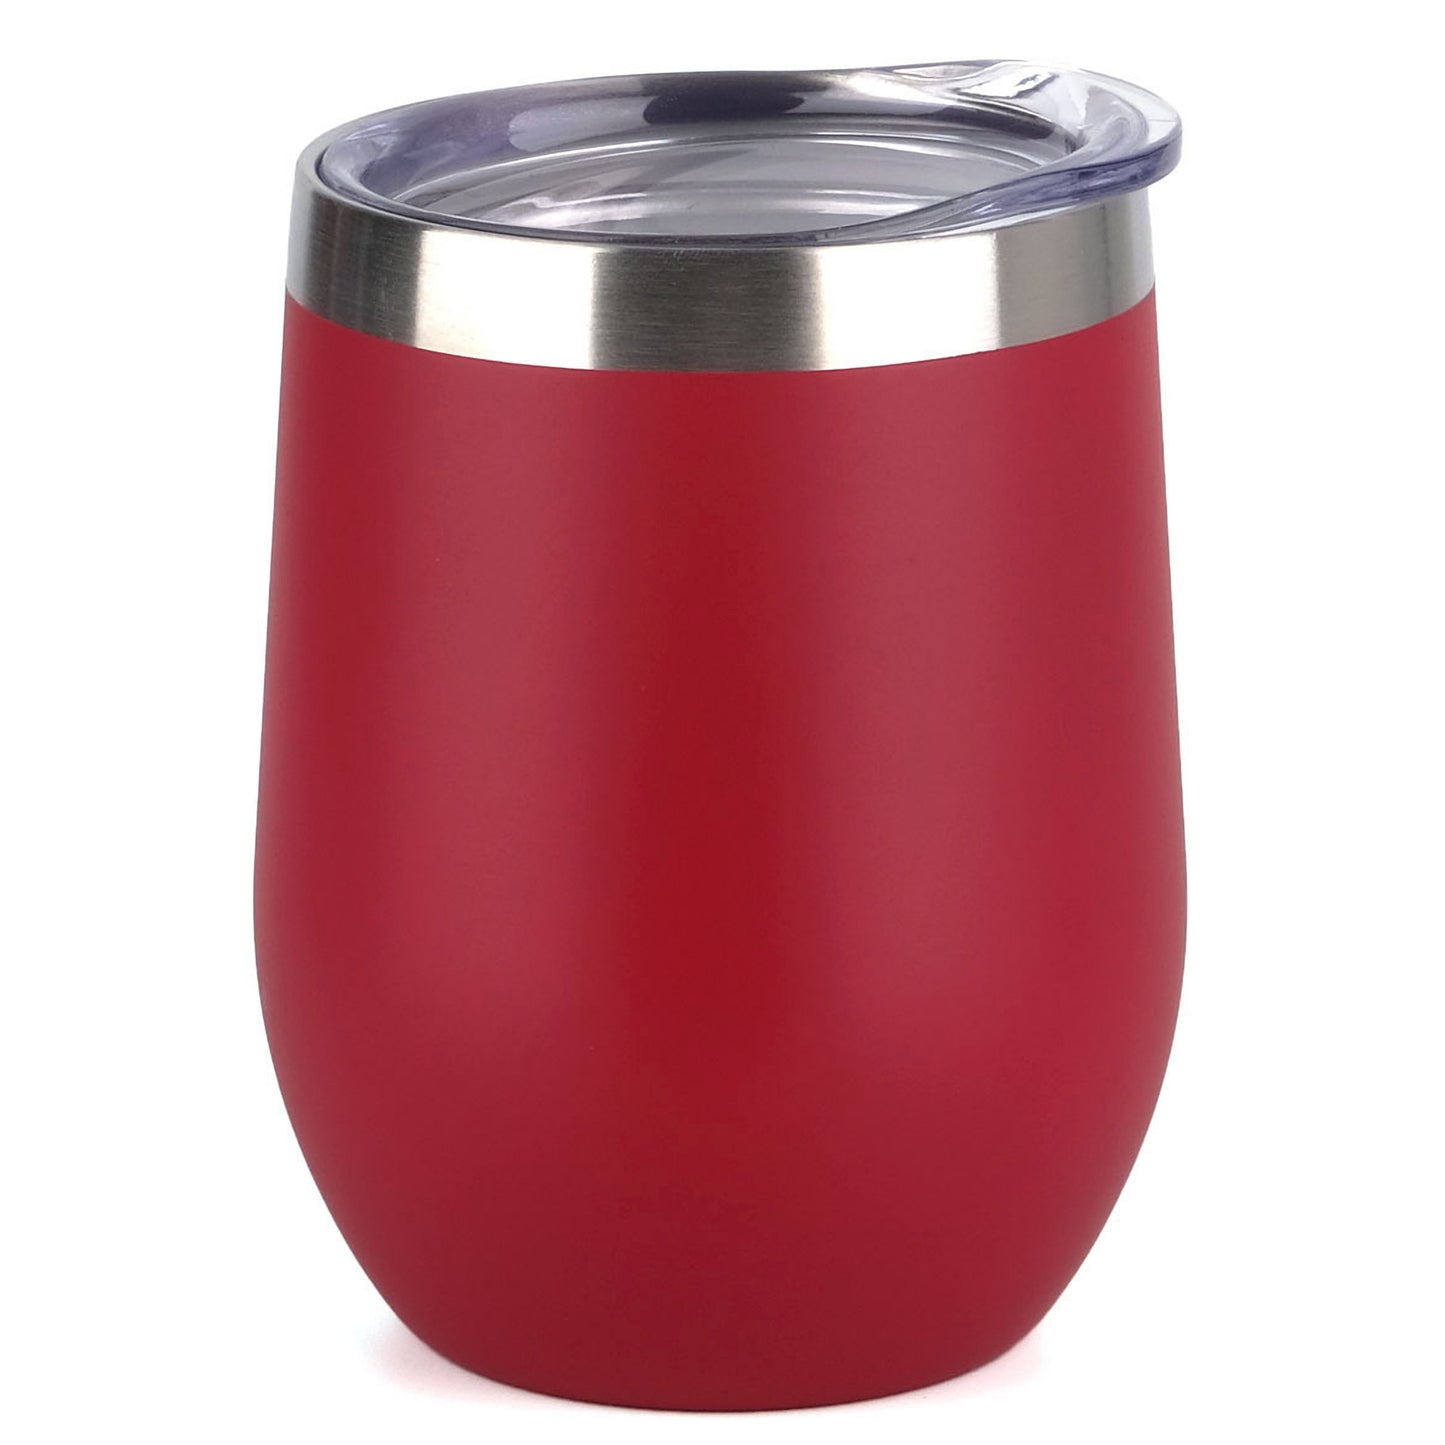 SUNWILL Insulated Wine Tumbler with Lid White, Double Wall Stainless Steel  Stemless Insulated Wine G…See more SUNWILL Insulated Wine Tumbler with Lid